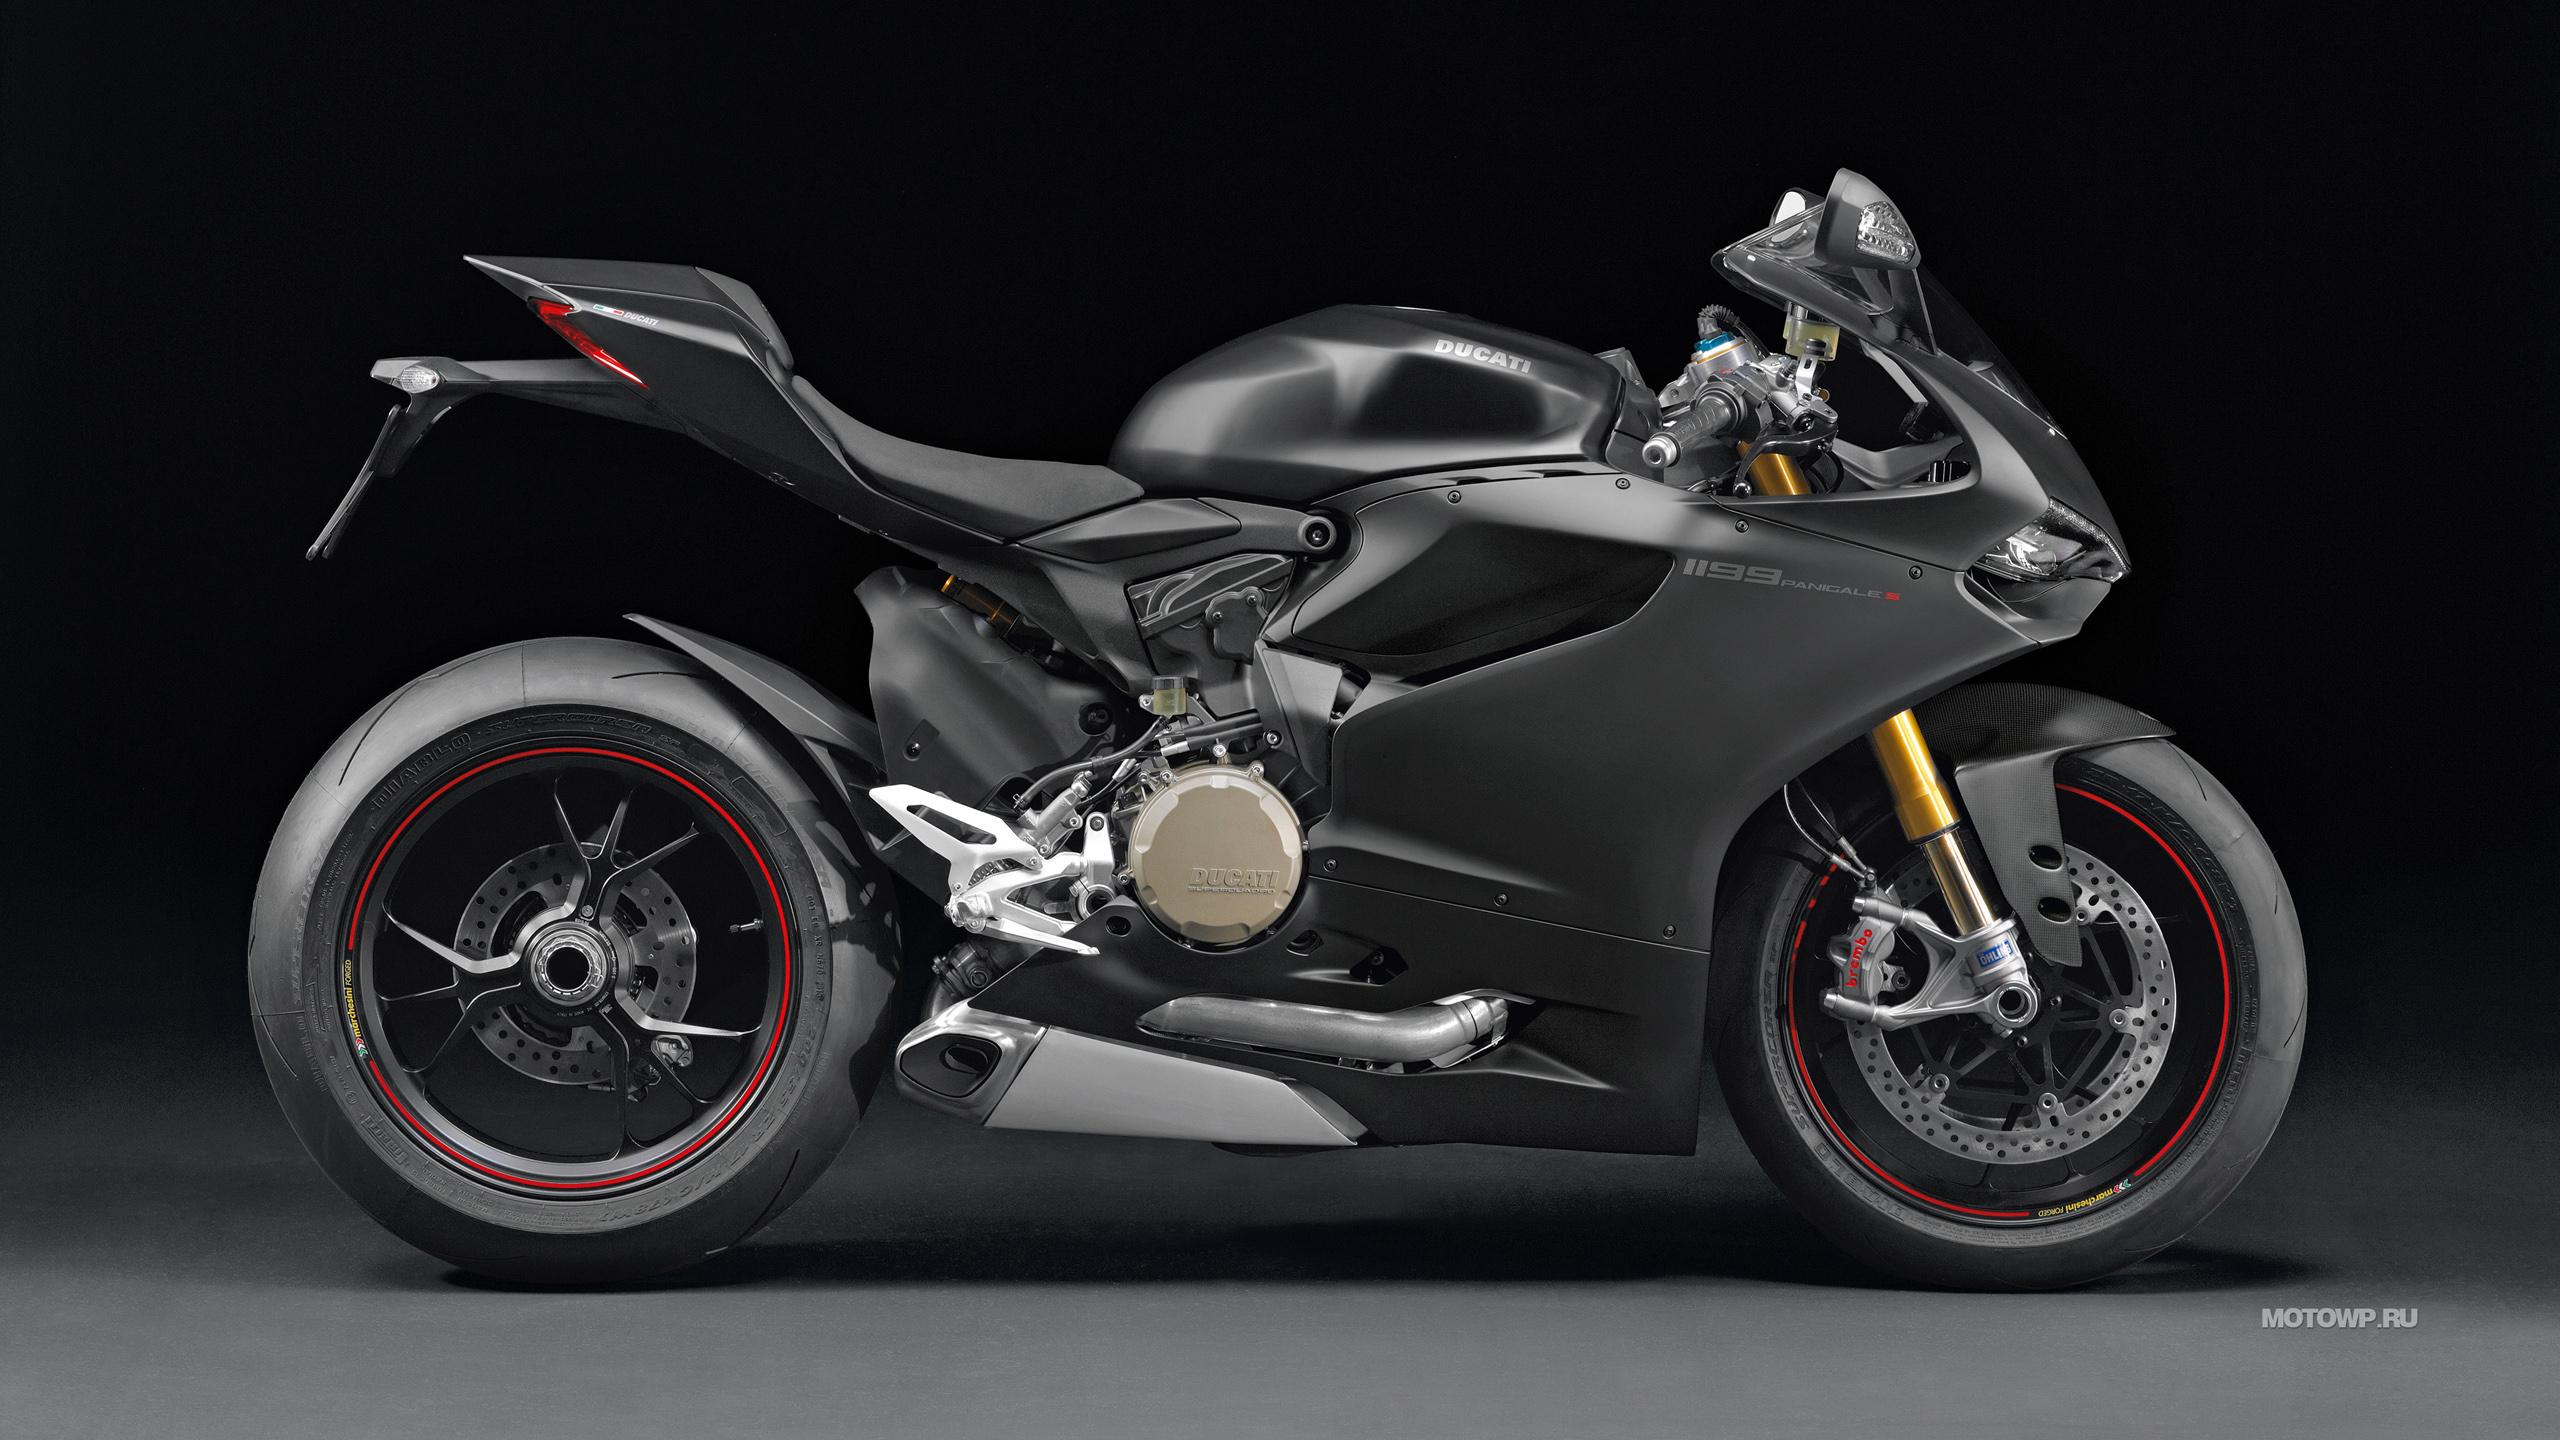 Image of Ducati 1199 Panigale S